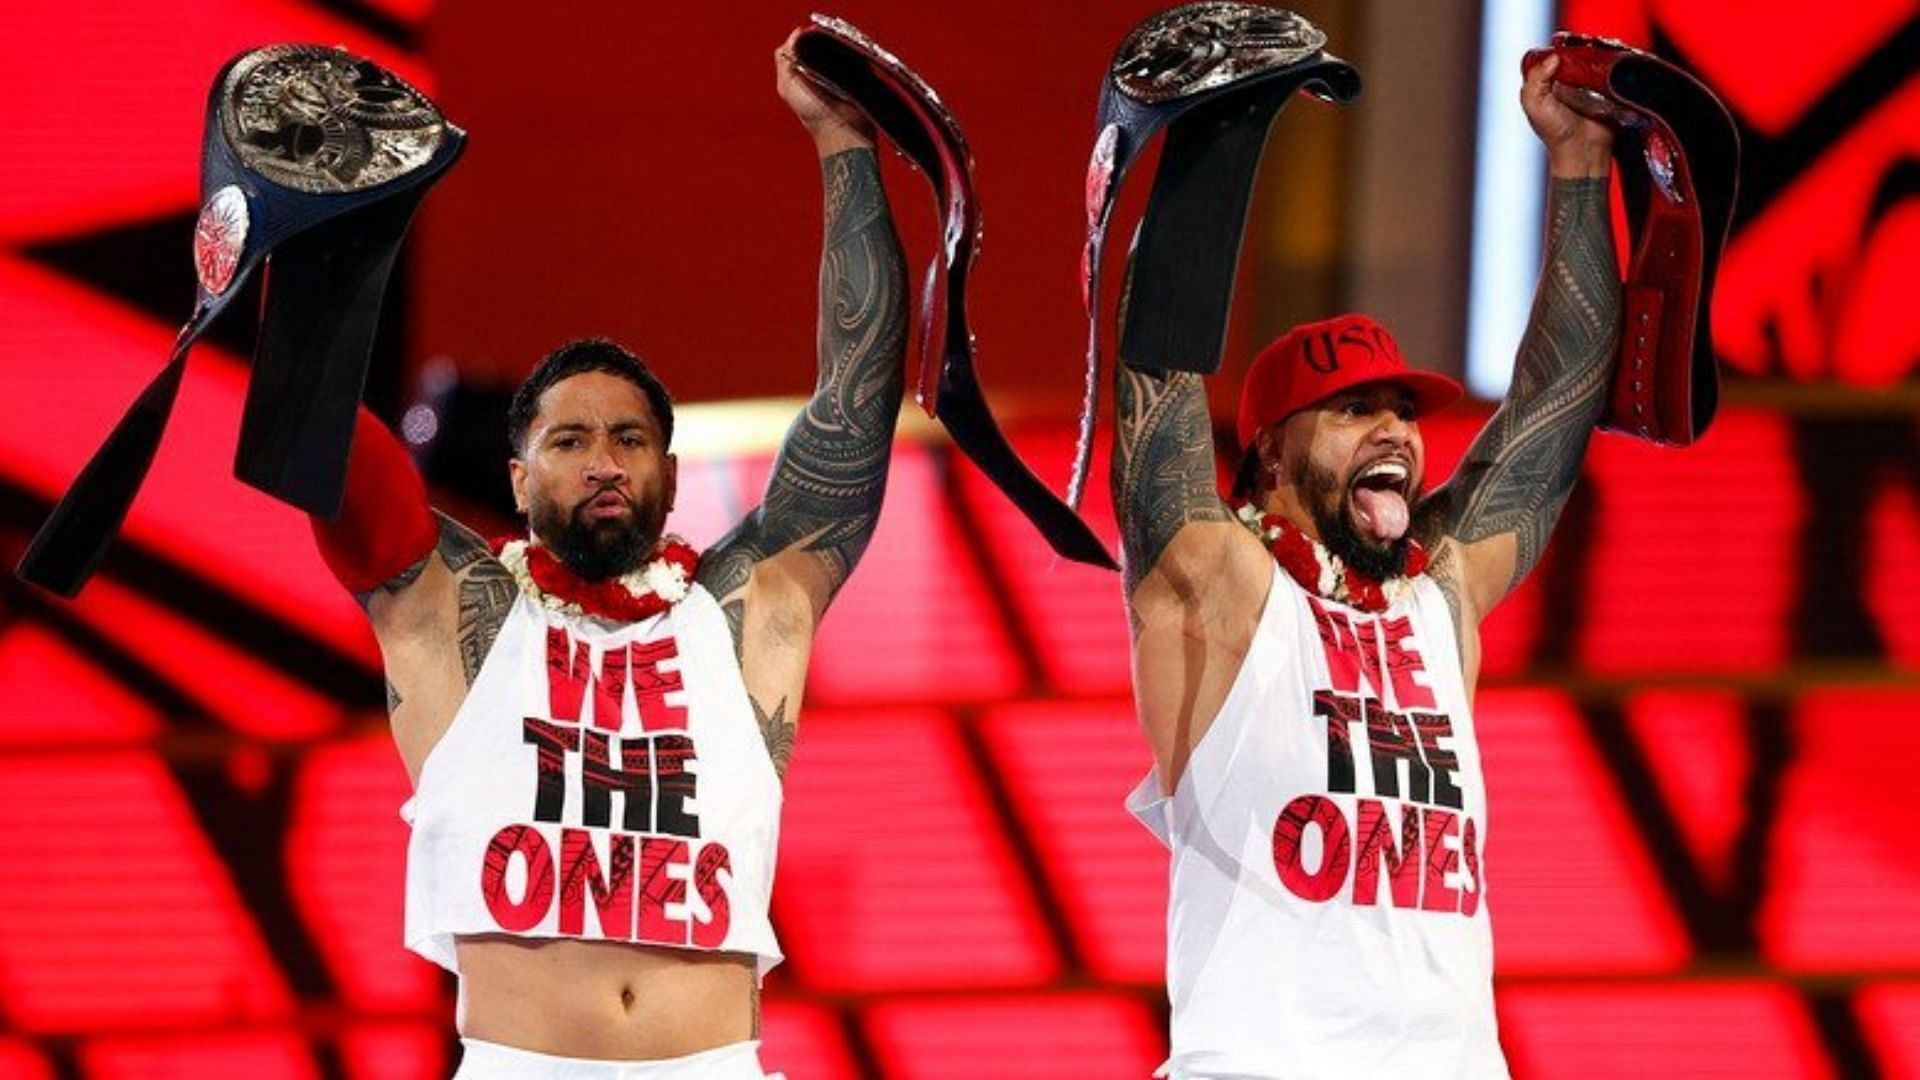 The Usos as Undisputed WWE Tag Team Champions.